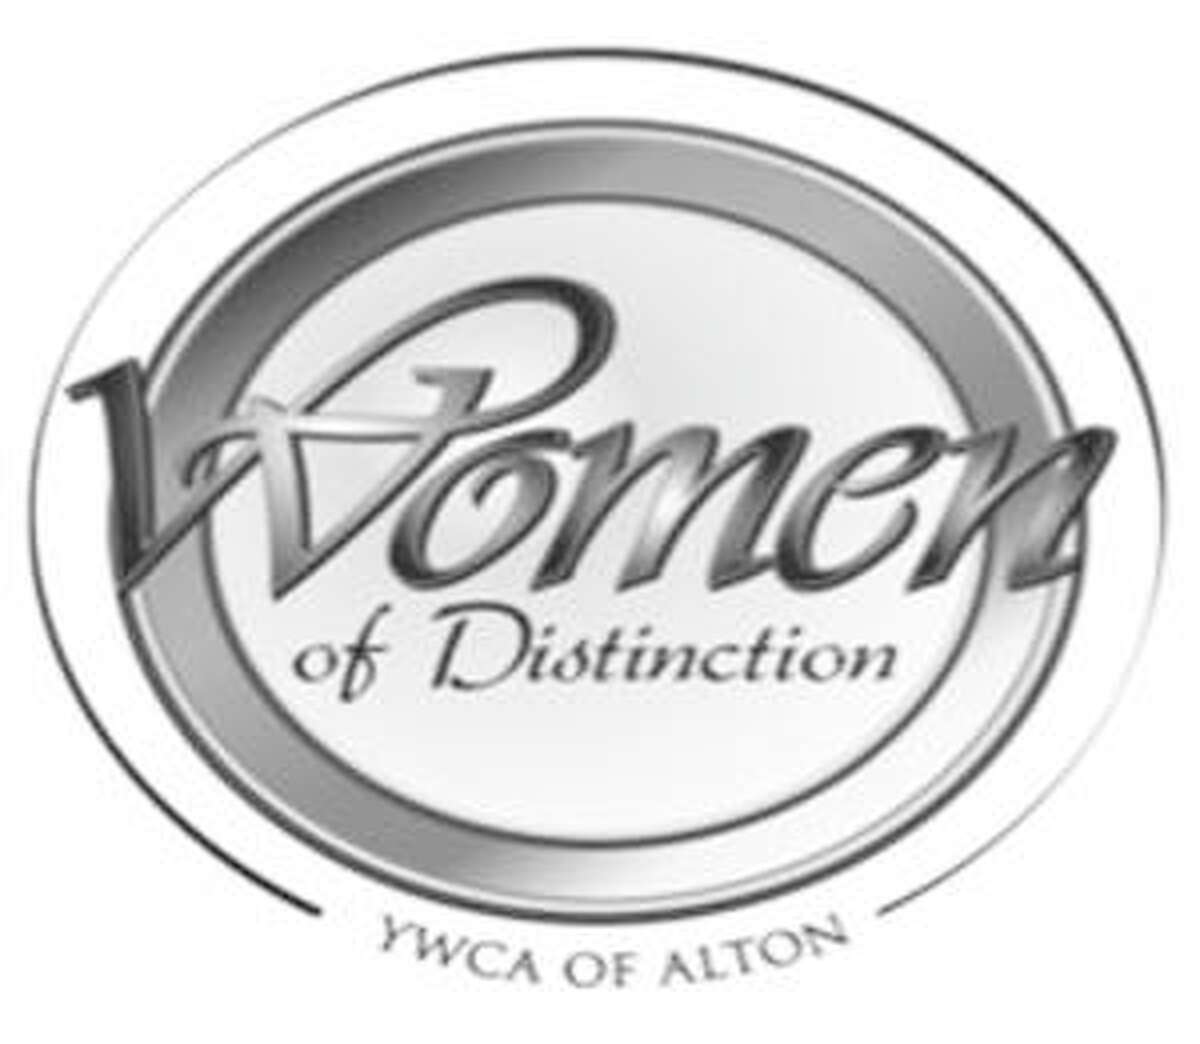 Editor’s note: This is one of a 12-part series introducing this year’s YWCA of Alton Women of Distinction honorees, who will be recognized at the 30th annual Women of Distinction ceremony. The event’s previously scheduled date of May 28, at the Commons at Lewis and Clark Community College, has now been rescheduled to Thursday, Sept. 17, due to current stay-at-home orders surrounding COVID-19. For more information, visit altonywca.com.